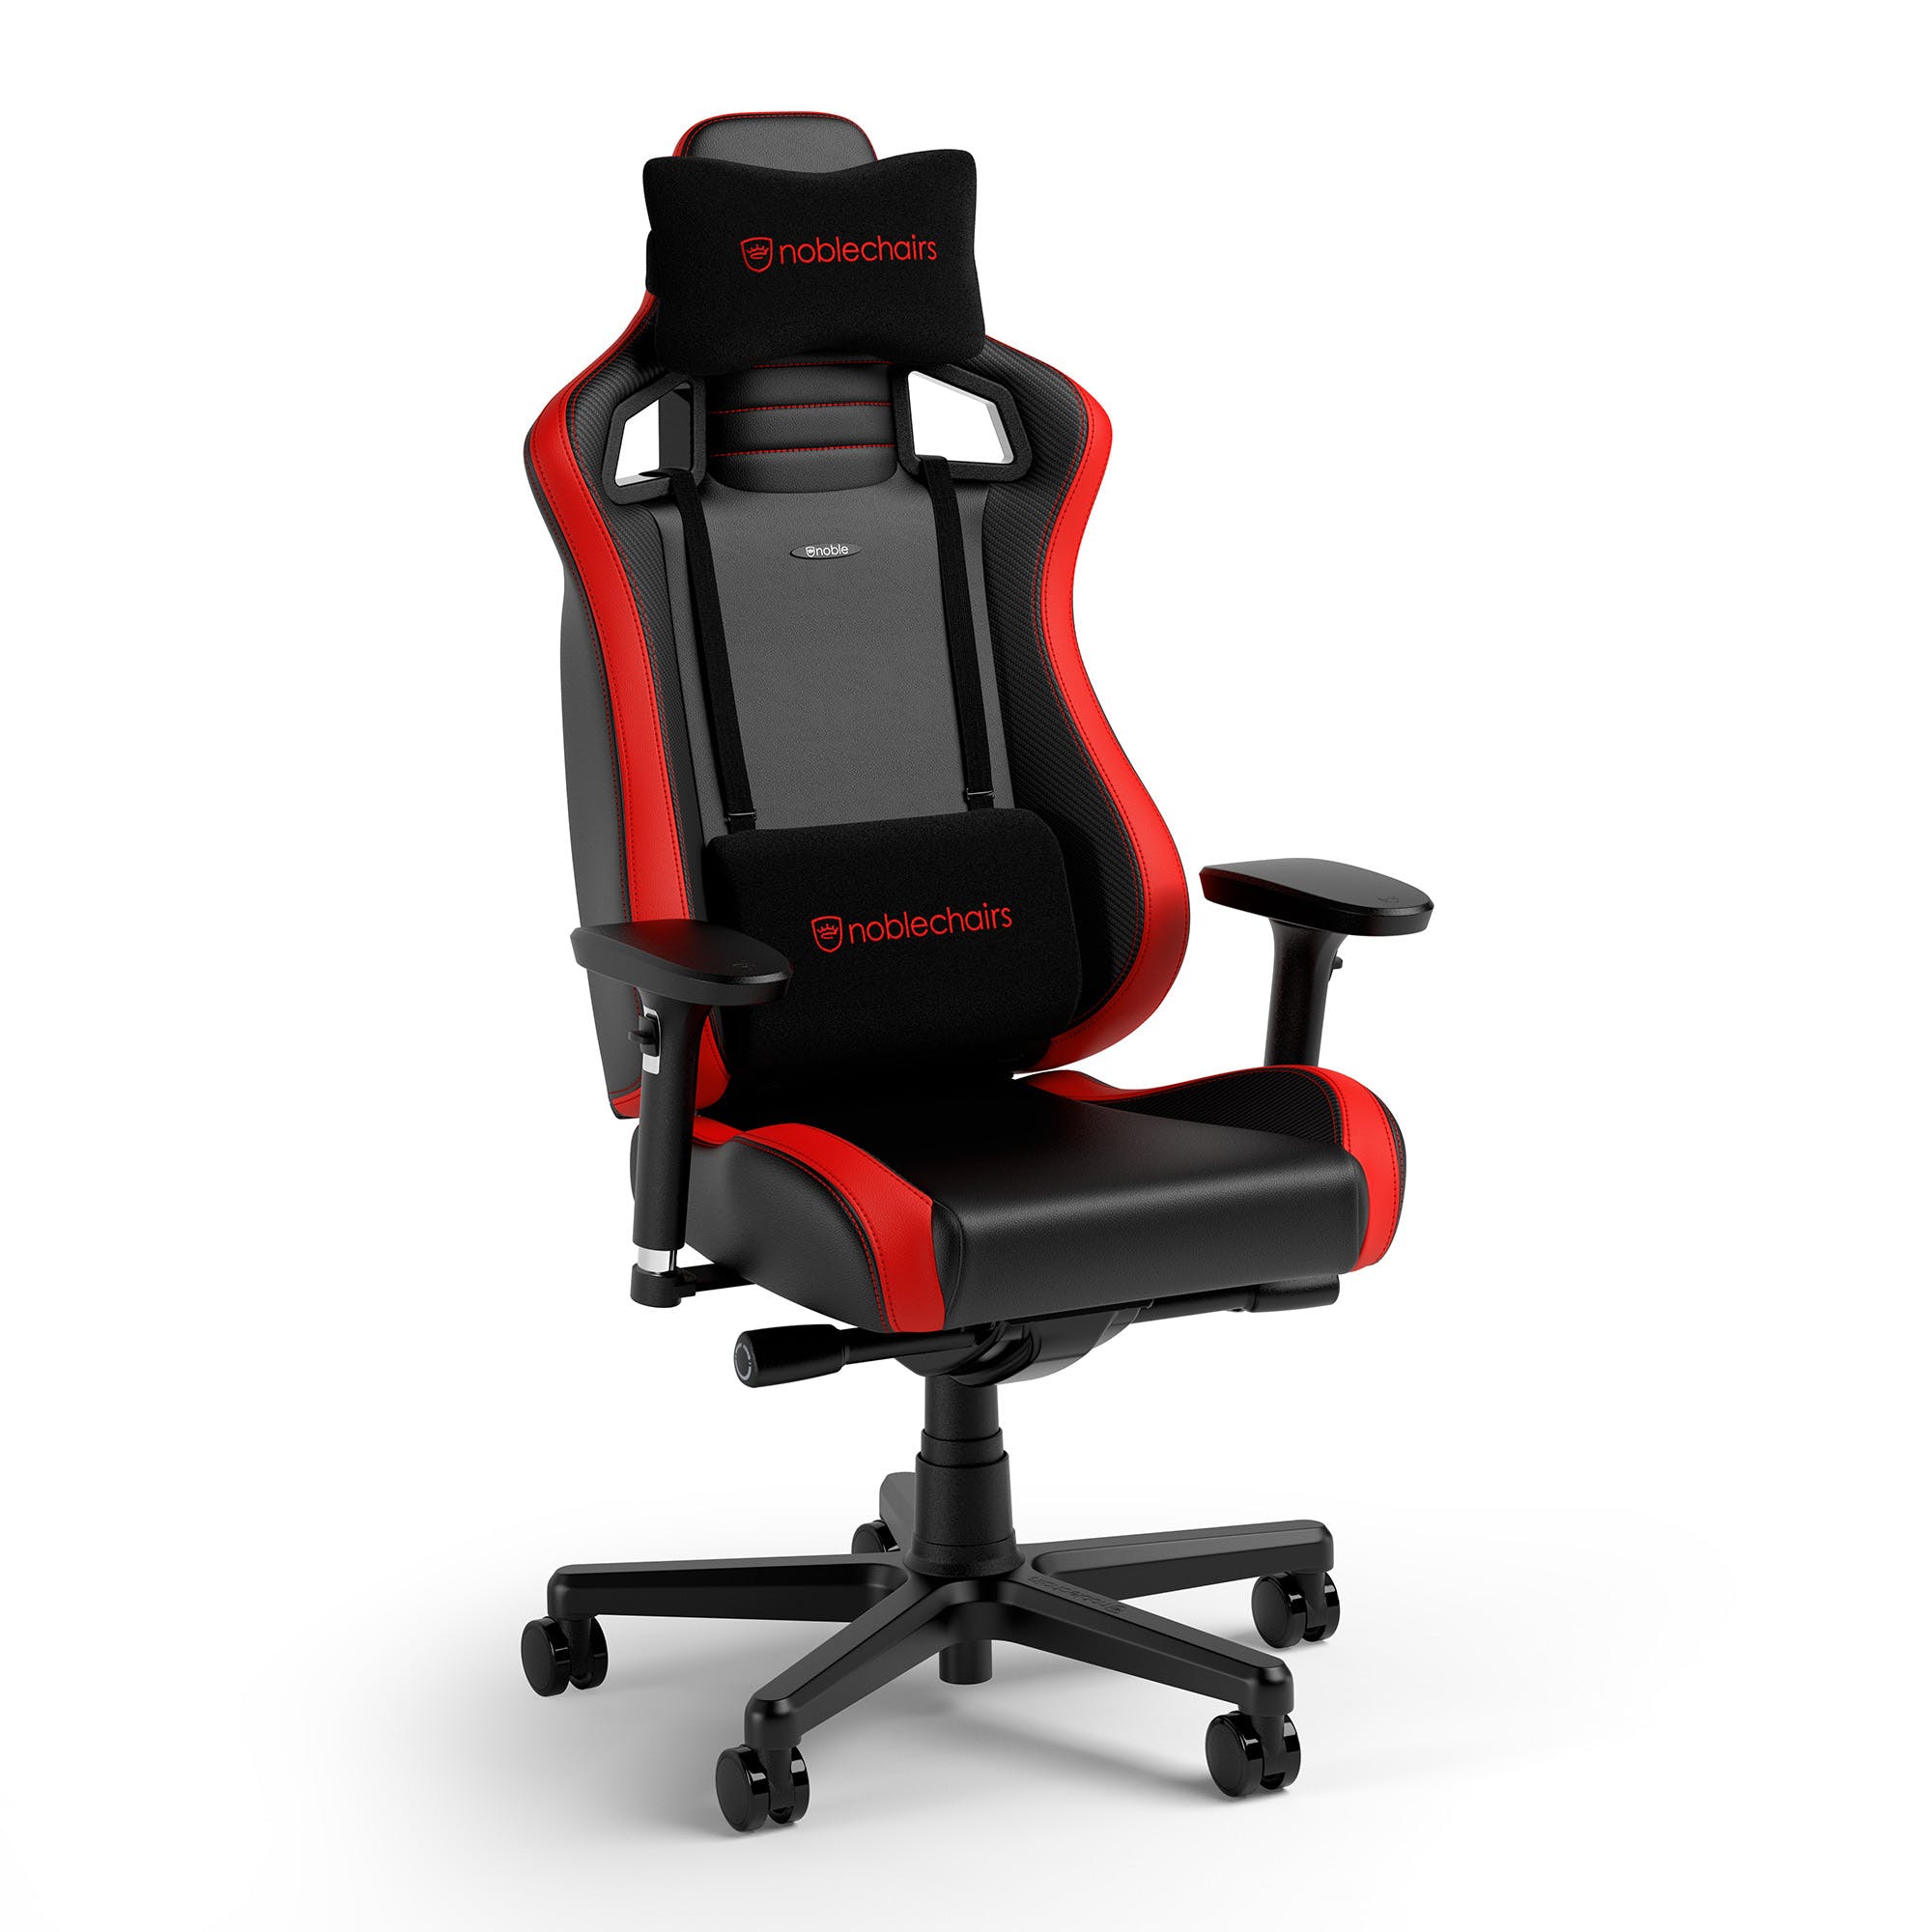 noblechairs - noblechairs EPIC Compact Gaming Chair-carbon/black/red